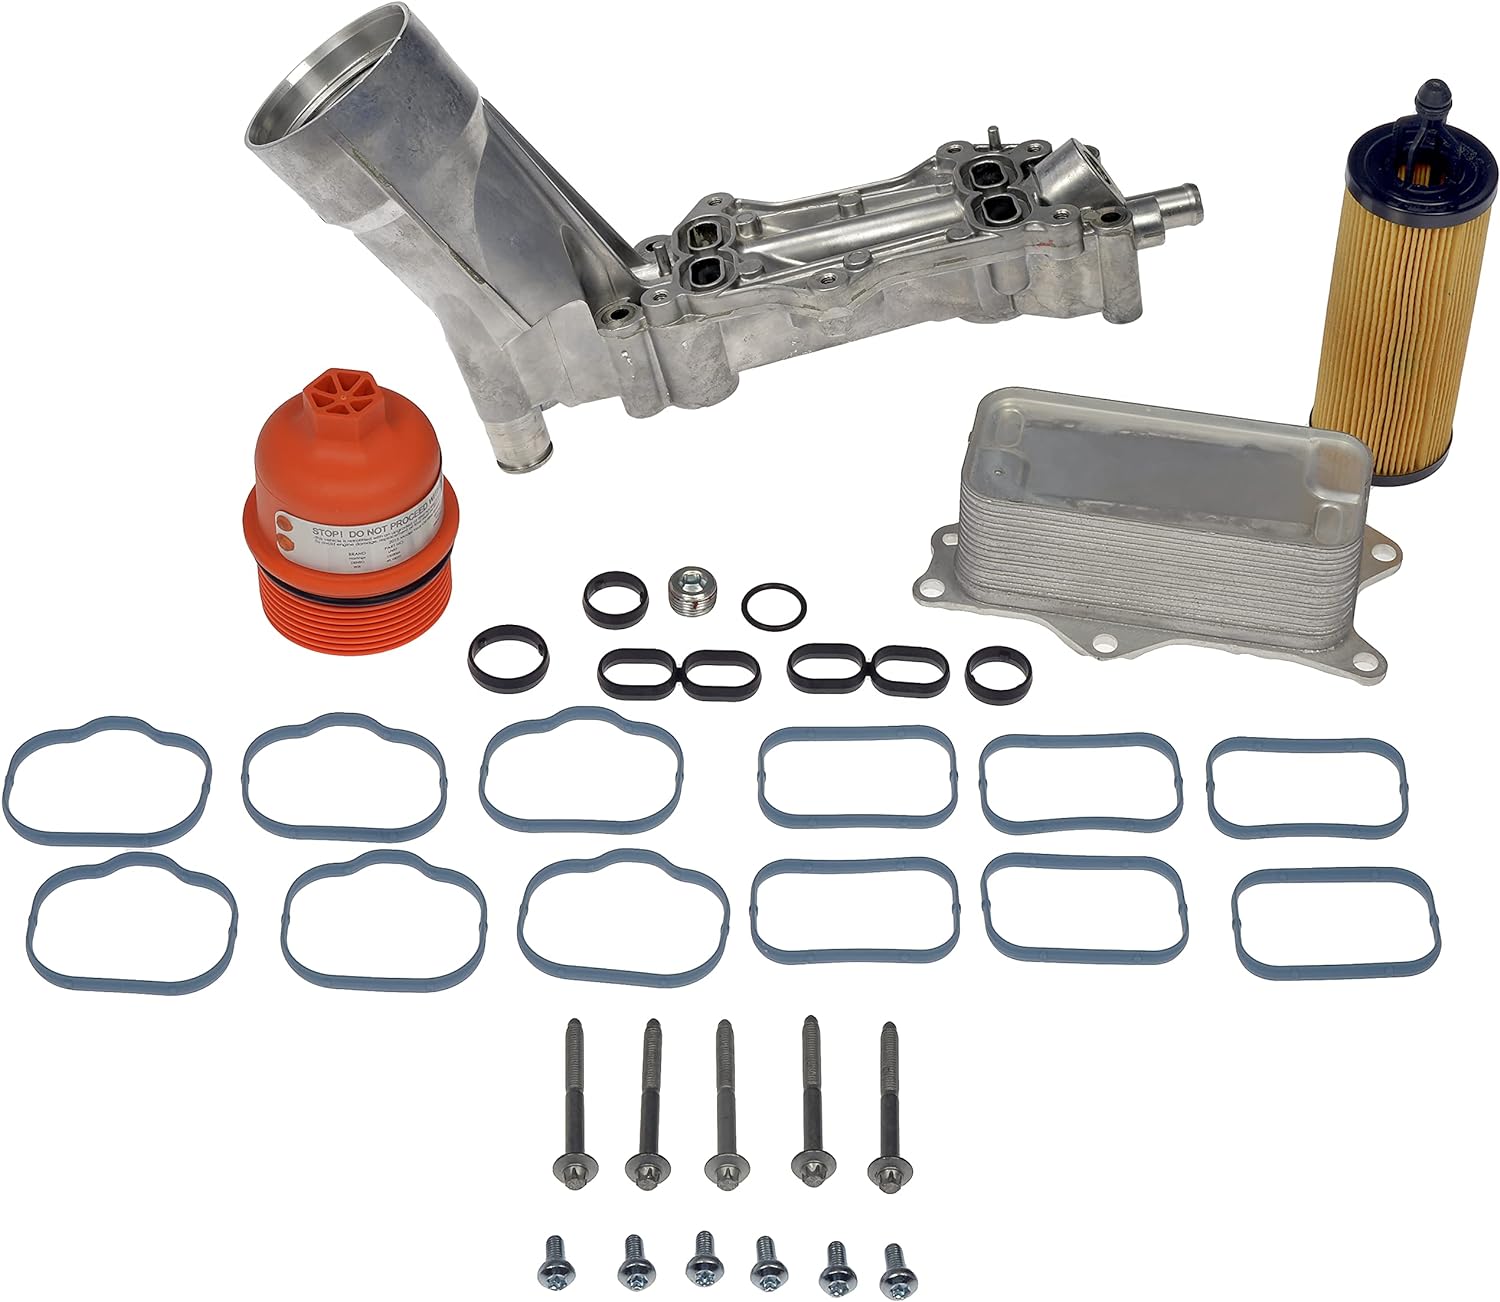 Dorman Upgraded Aluminum Engine Oil Filter Housing with Oil Cooler and Filter